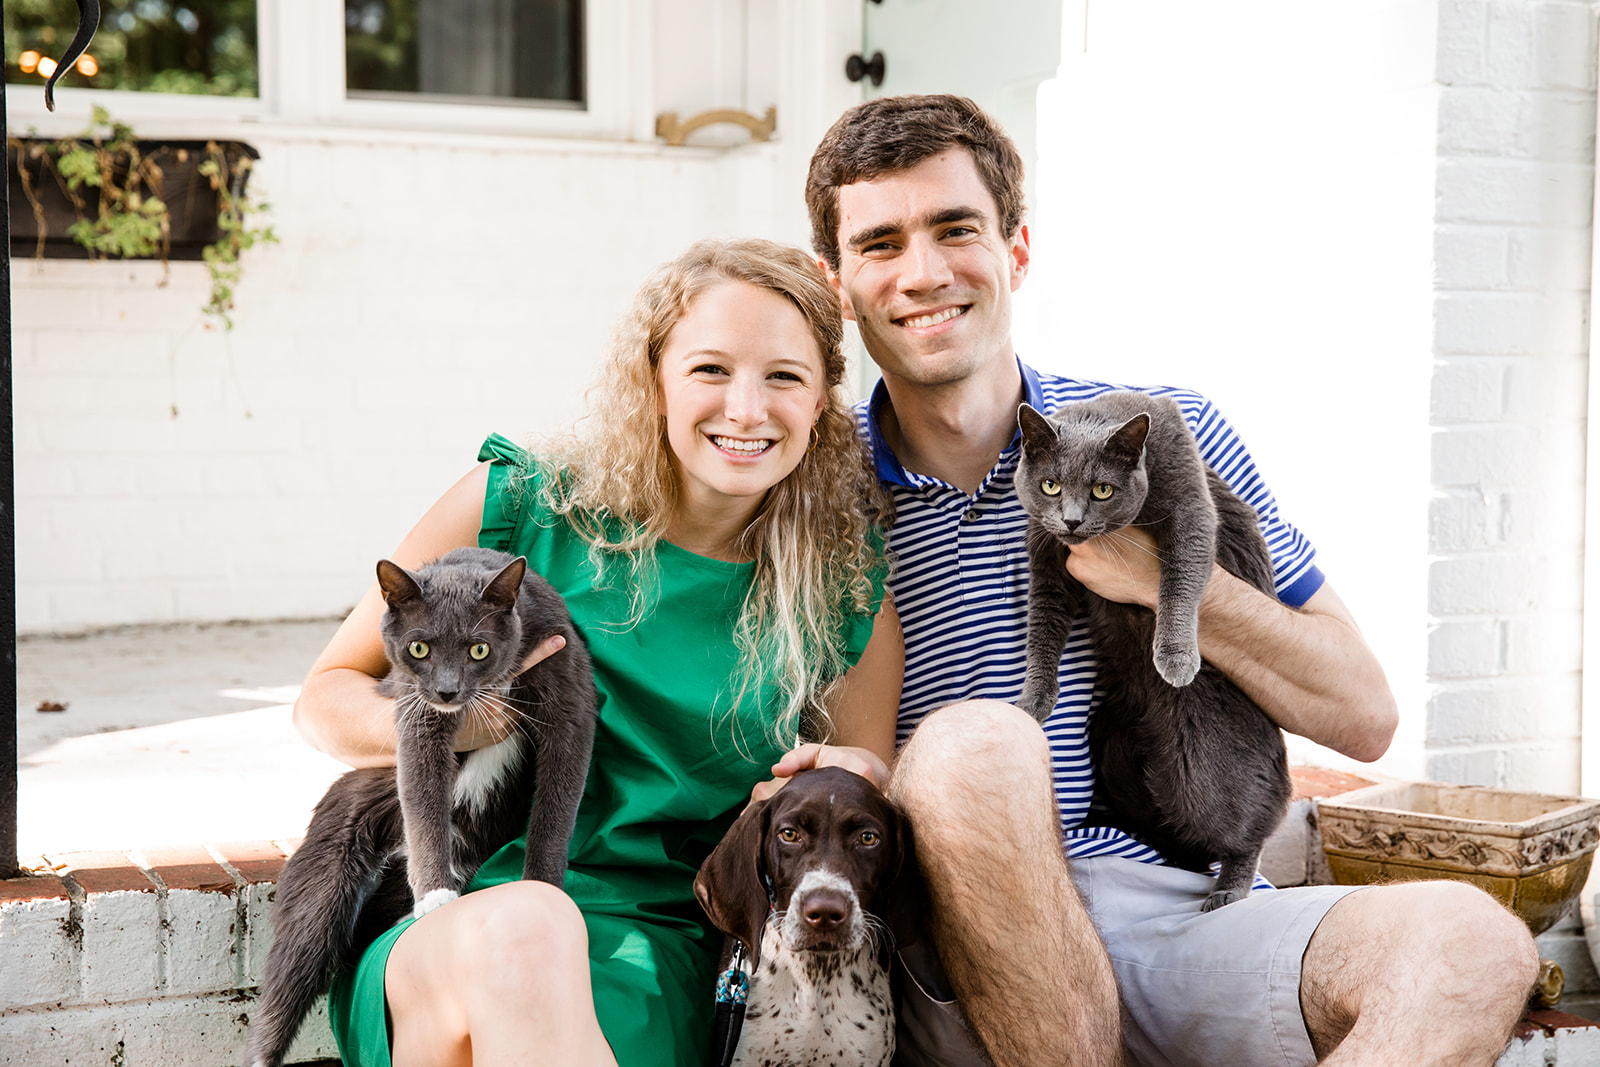 Bailey  Treys Fur Baby Filled At Home Engagement Shoot - Image Property of www.j-dphoto.com